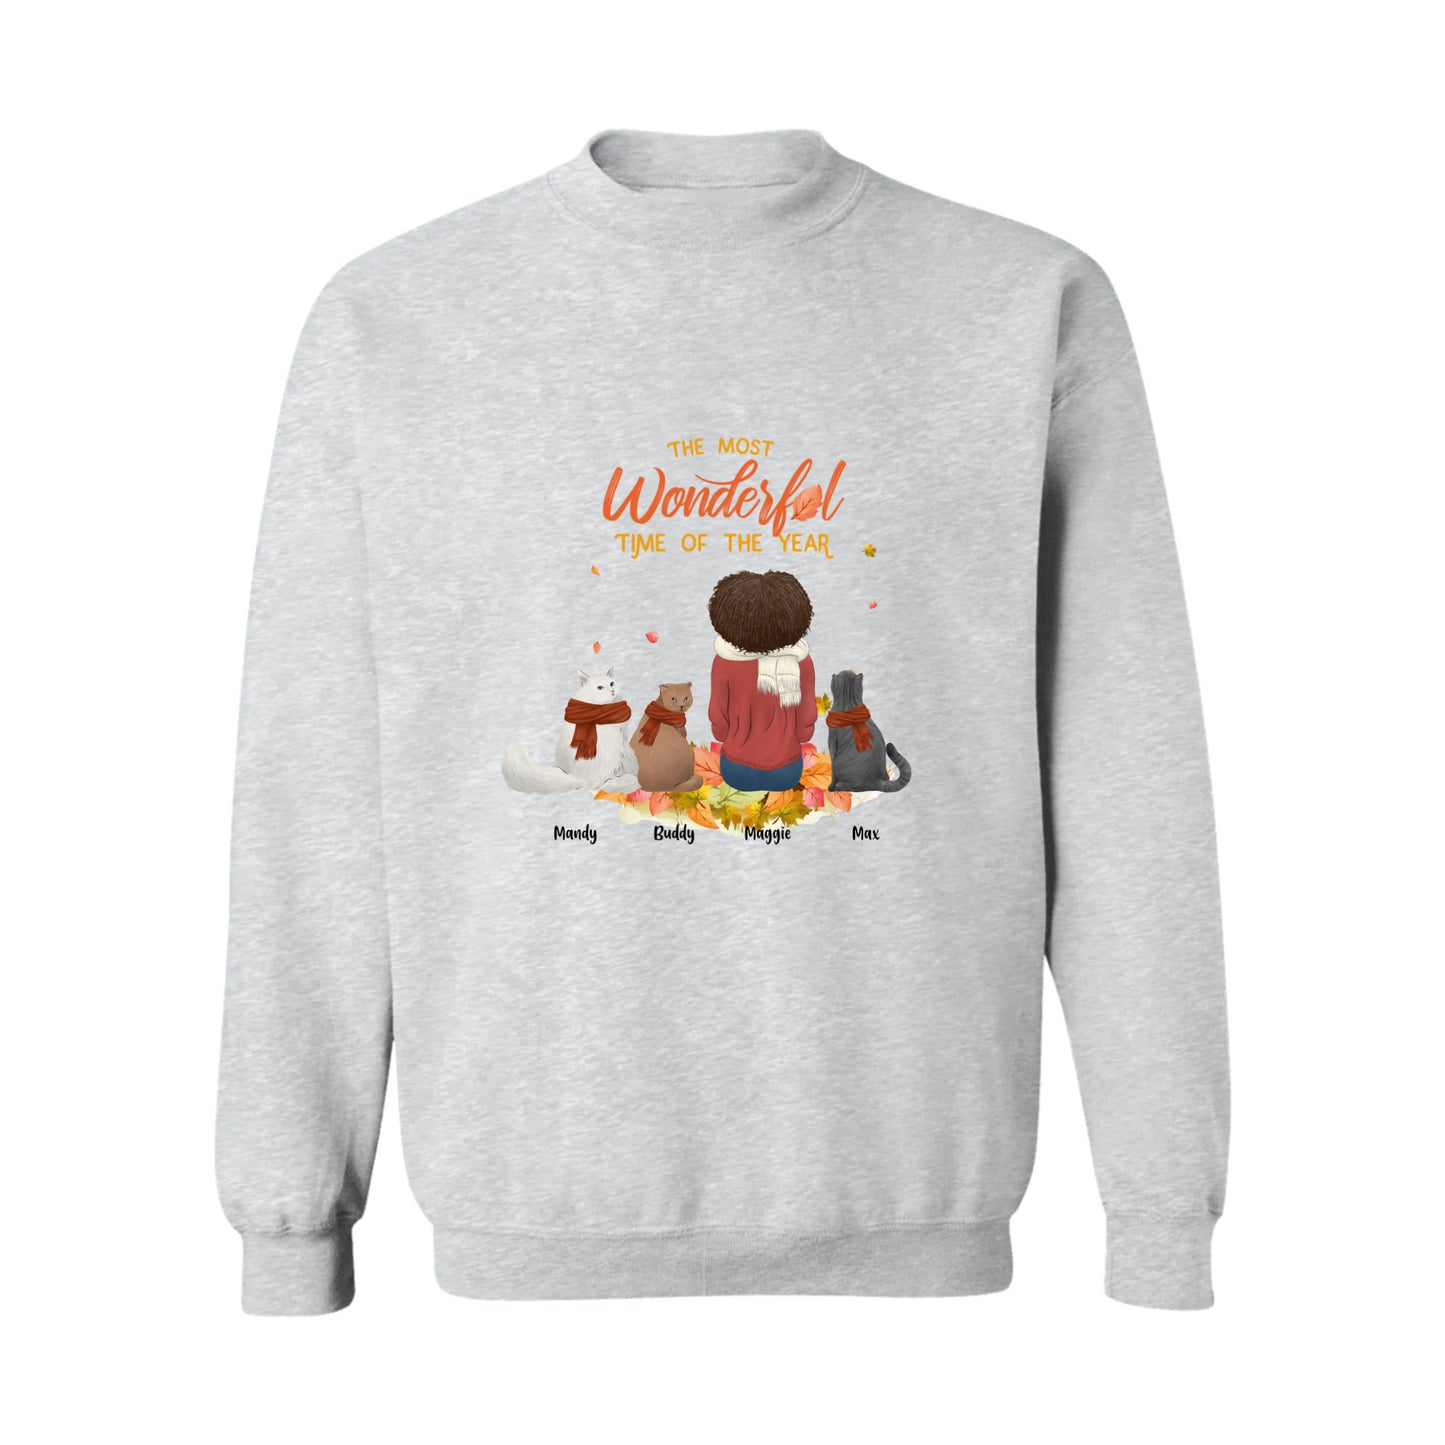 Its the Most Wonderful Time Of the Year Crewneck Pullover Sweatshirt